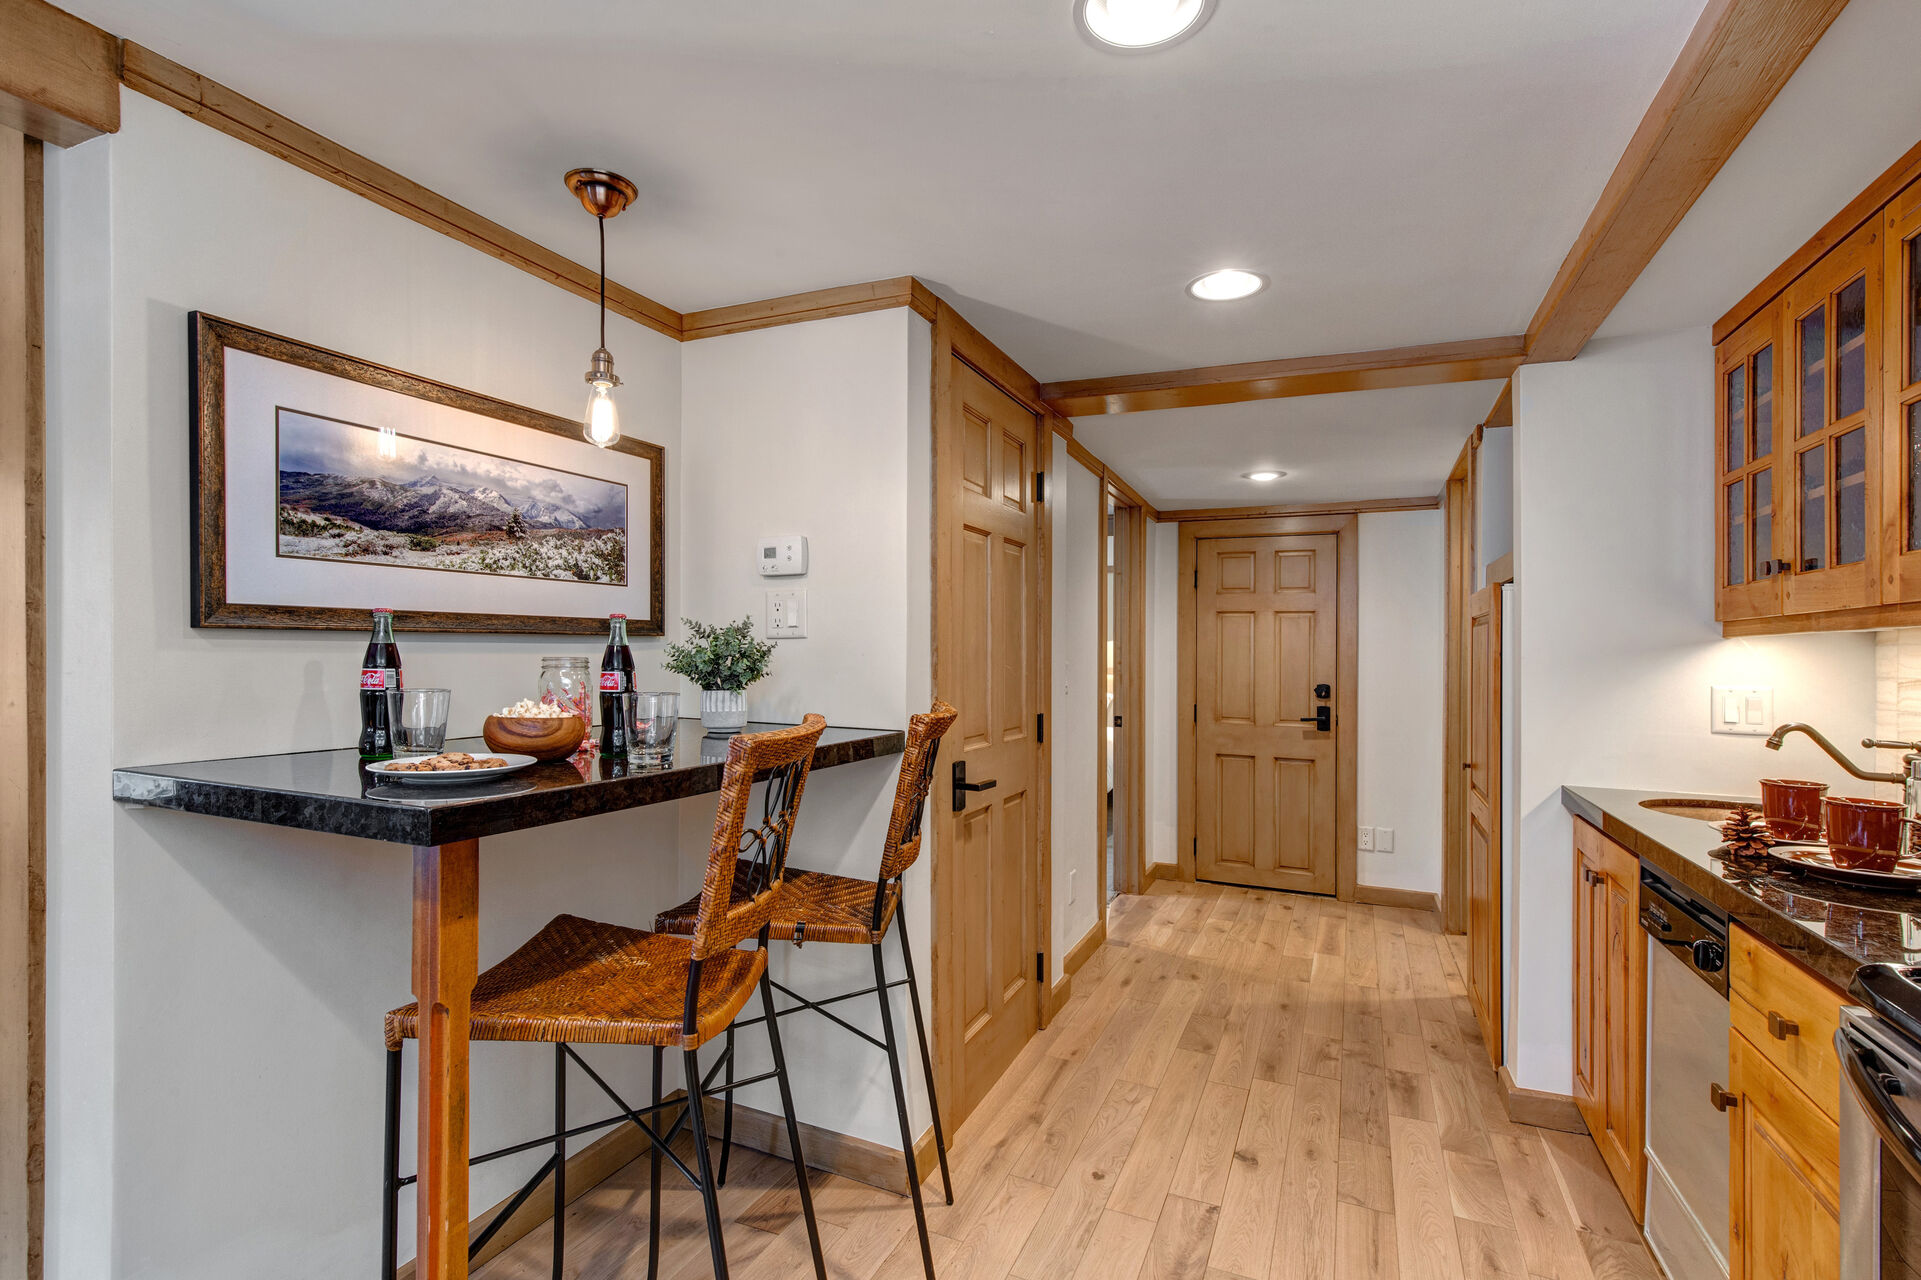 Lower Level Kitchenette with bar seating for two, stainless steel appliances and hot tub patio access